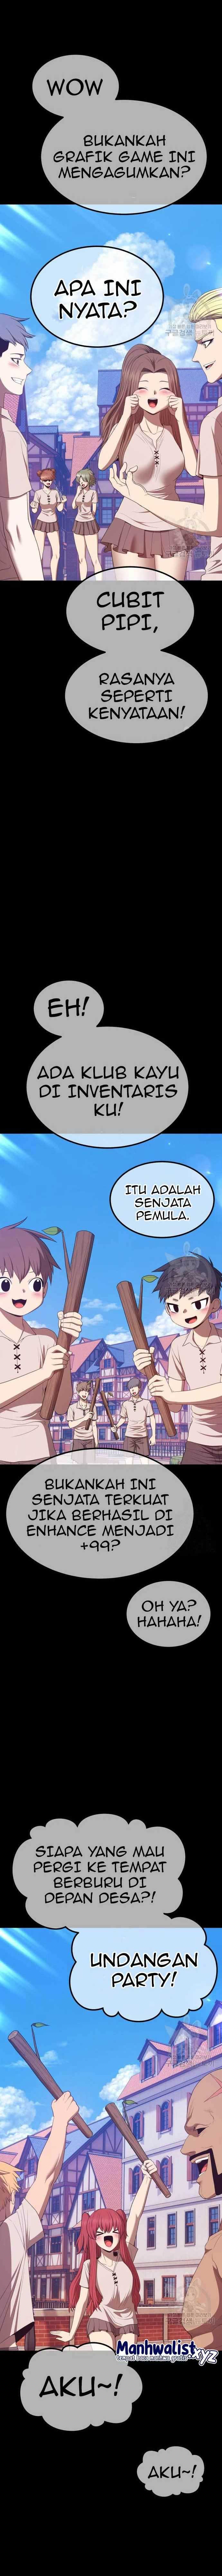 +99 Wooden Stick Chapter 77 Image 50